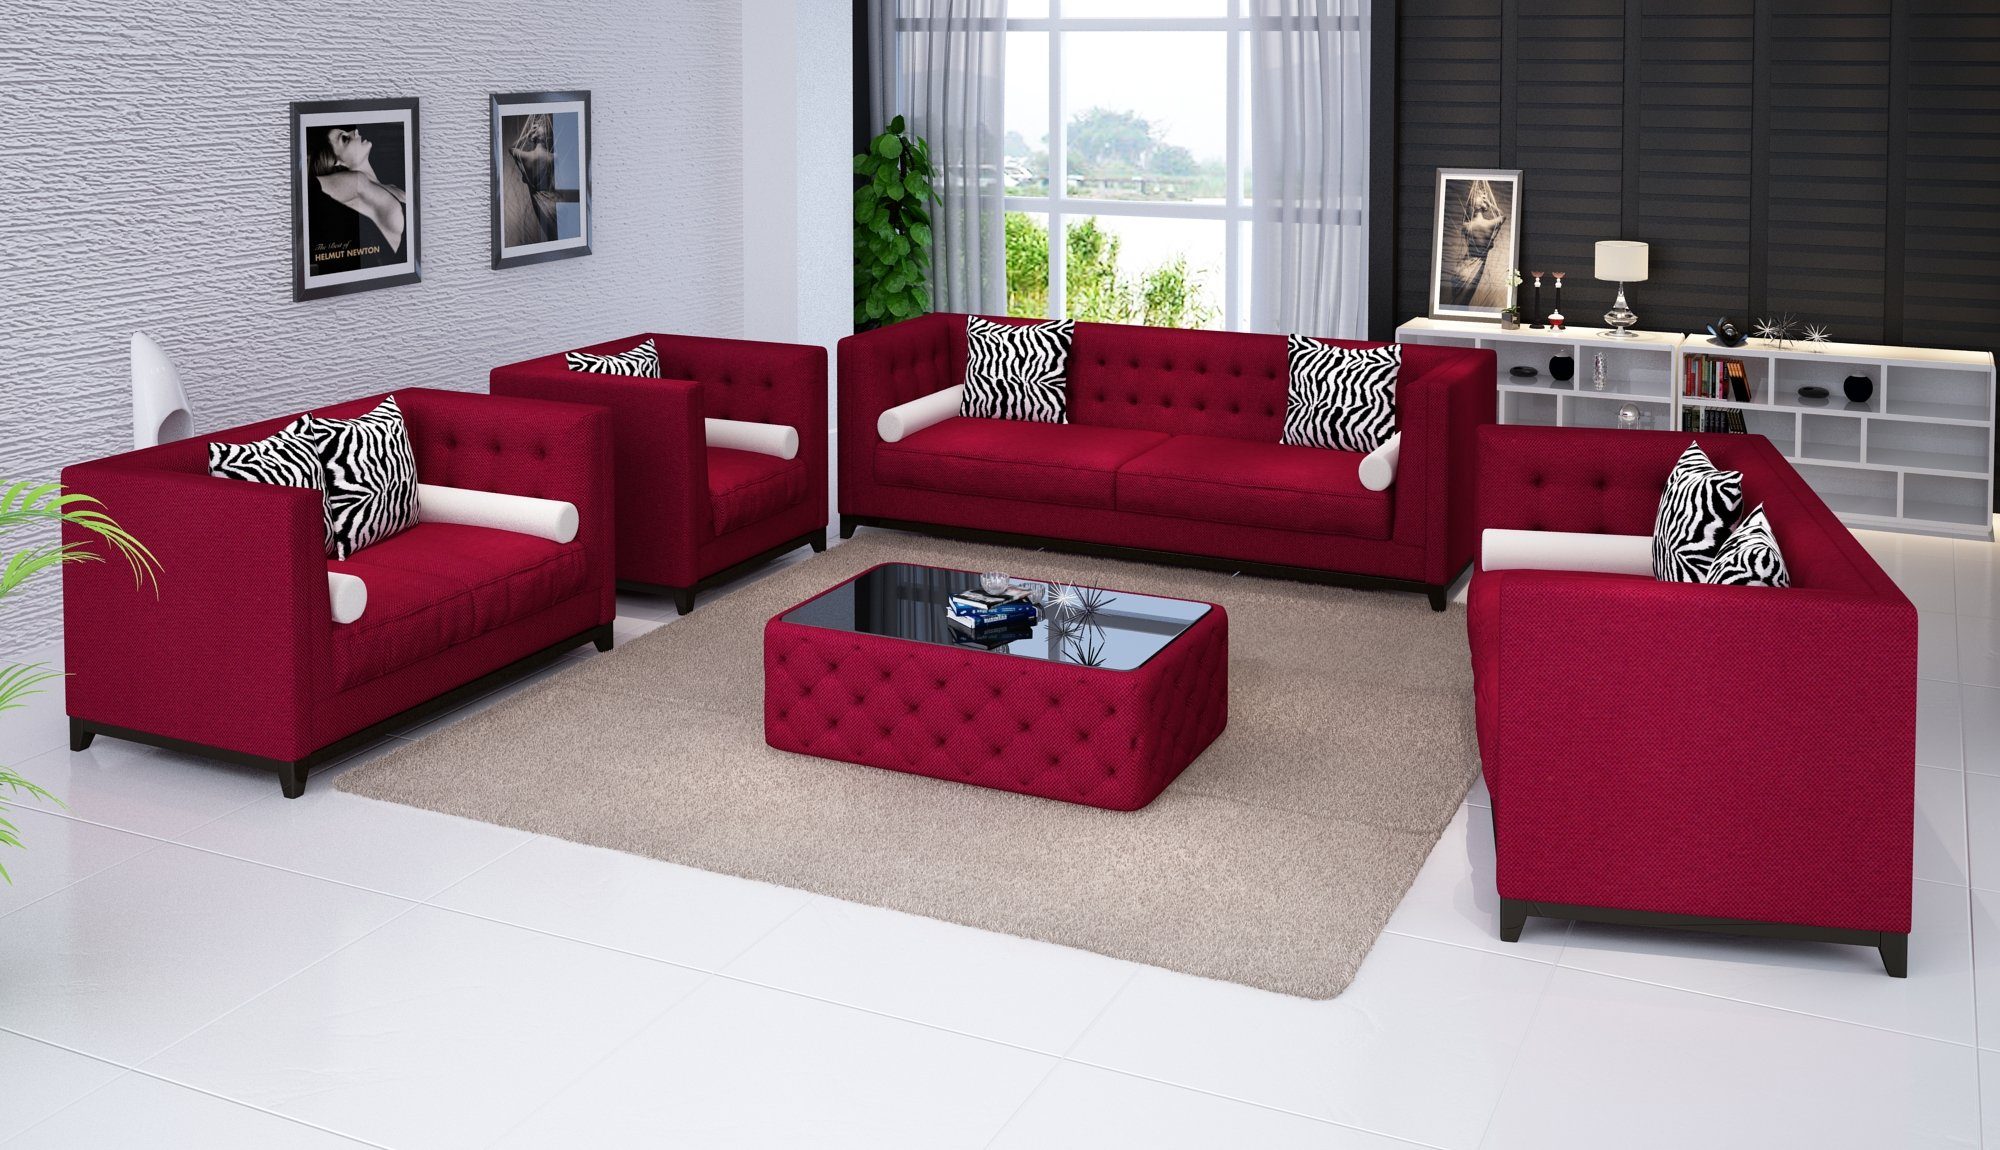 Europe Sofa Sessel, in Sofagarnitur Rote Made Chesterfield Couchen JVmoebel Couch Sofa 3tlg